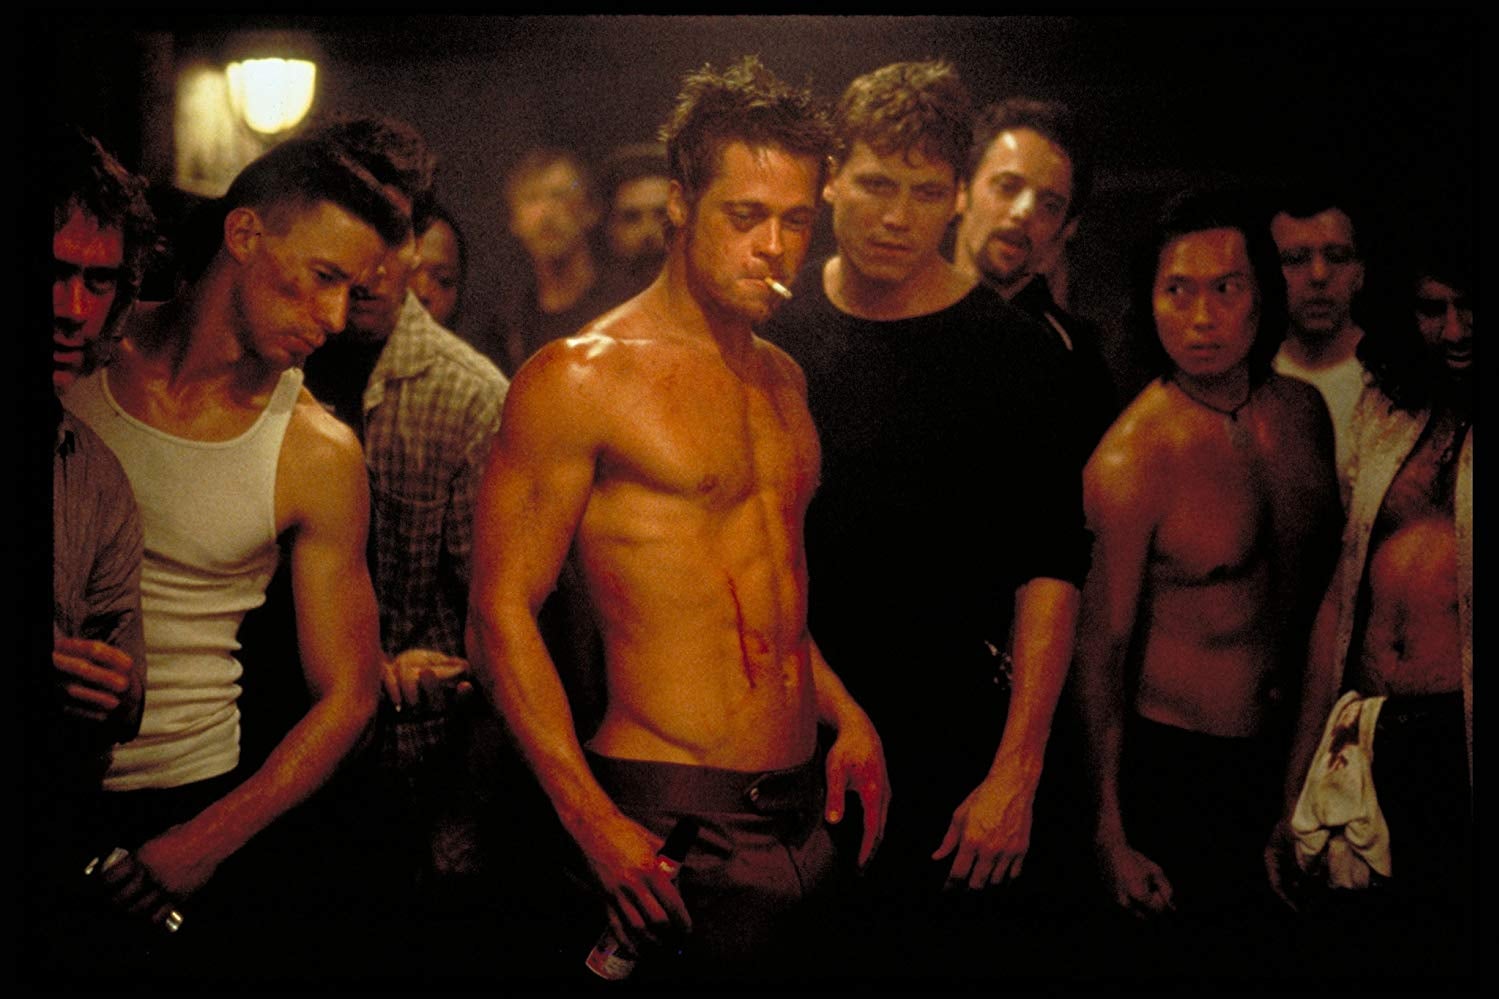 Brad Pitt stands shirtless in a crowd of bruised and bloodied men. A cigarette dangles between his lips.